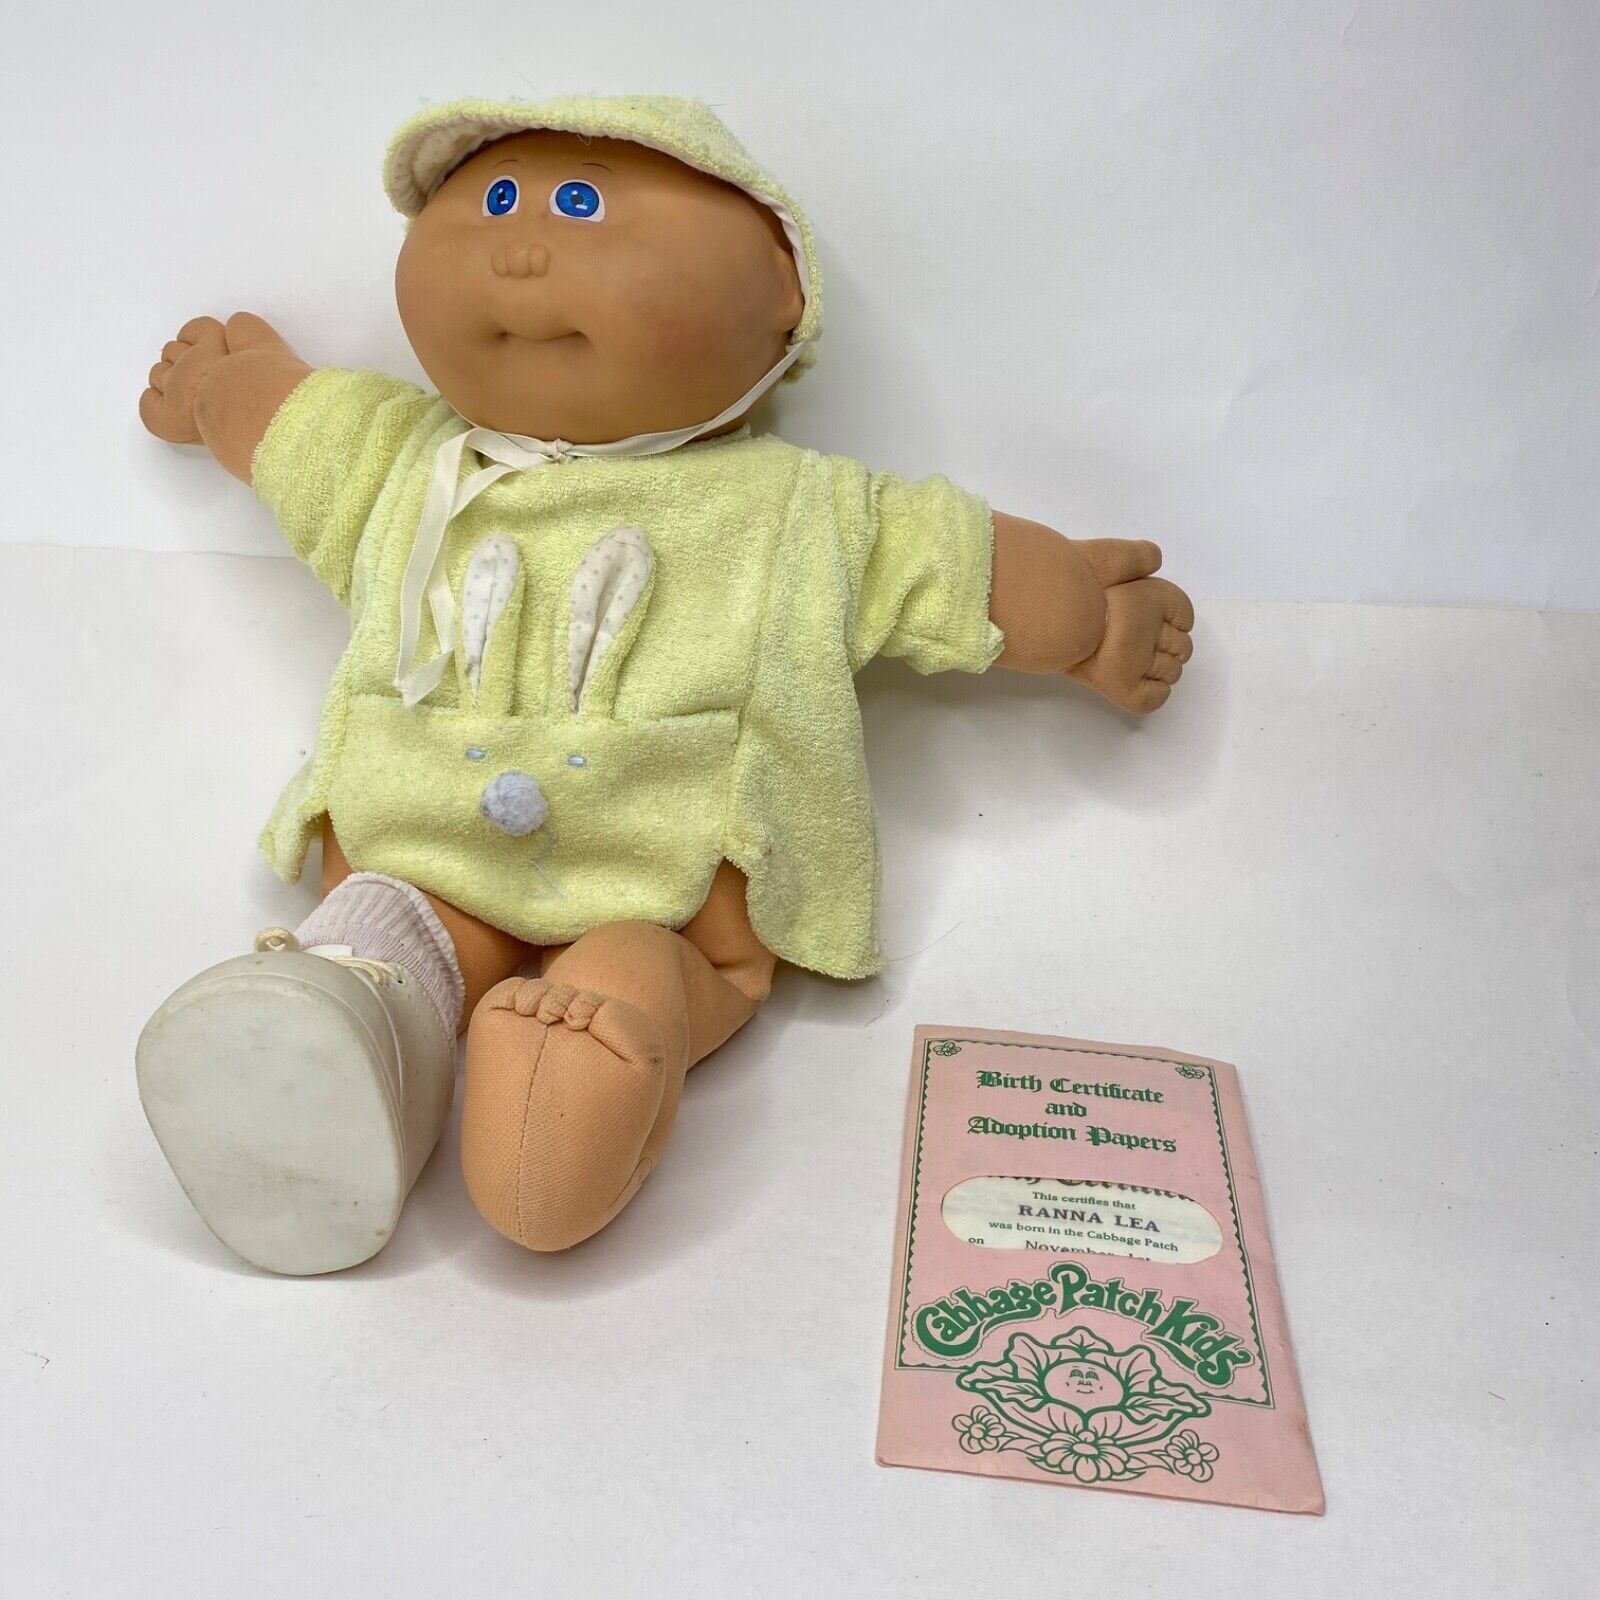 Vintage 1978, 1982 Cabbage Patch Kids Doll Baby with Yellow Bunny Outfit 1 21